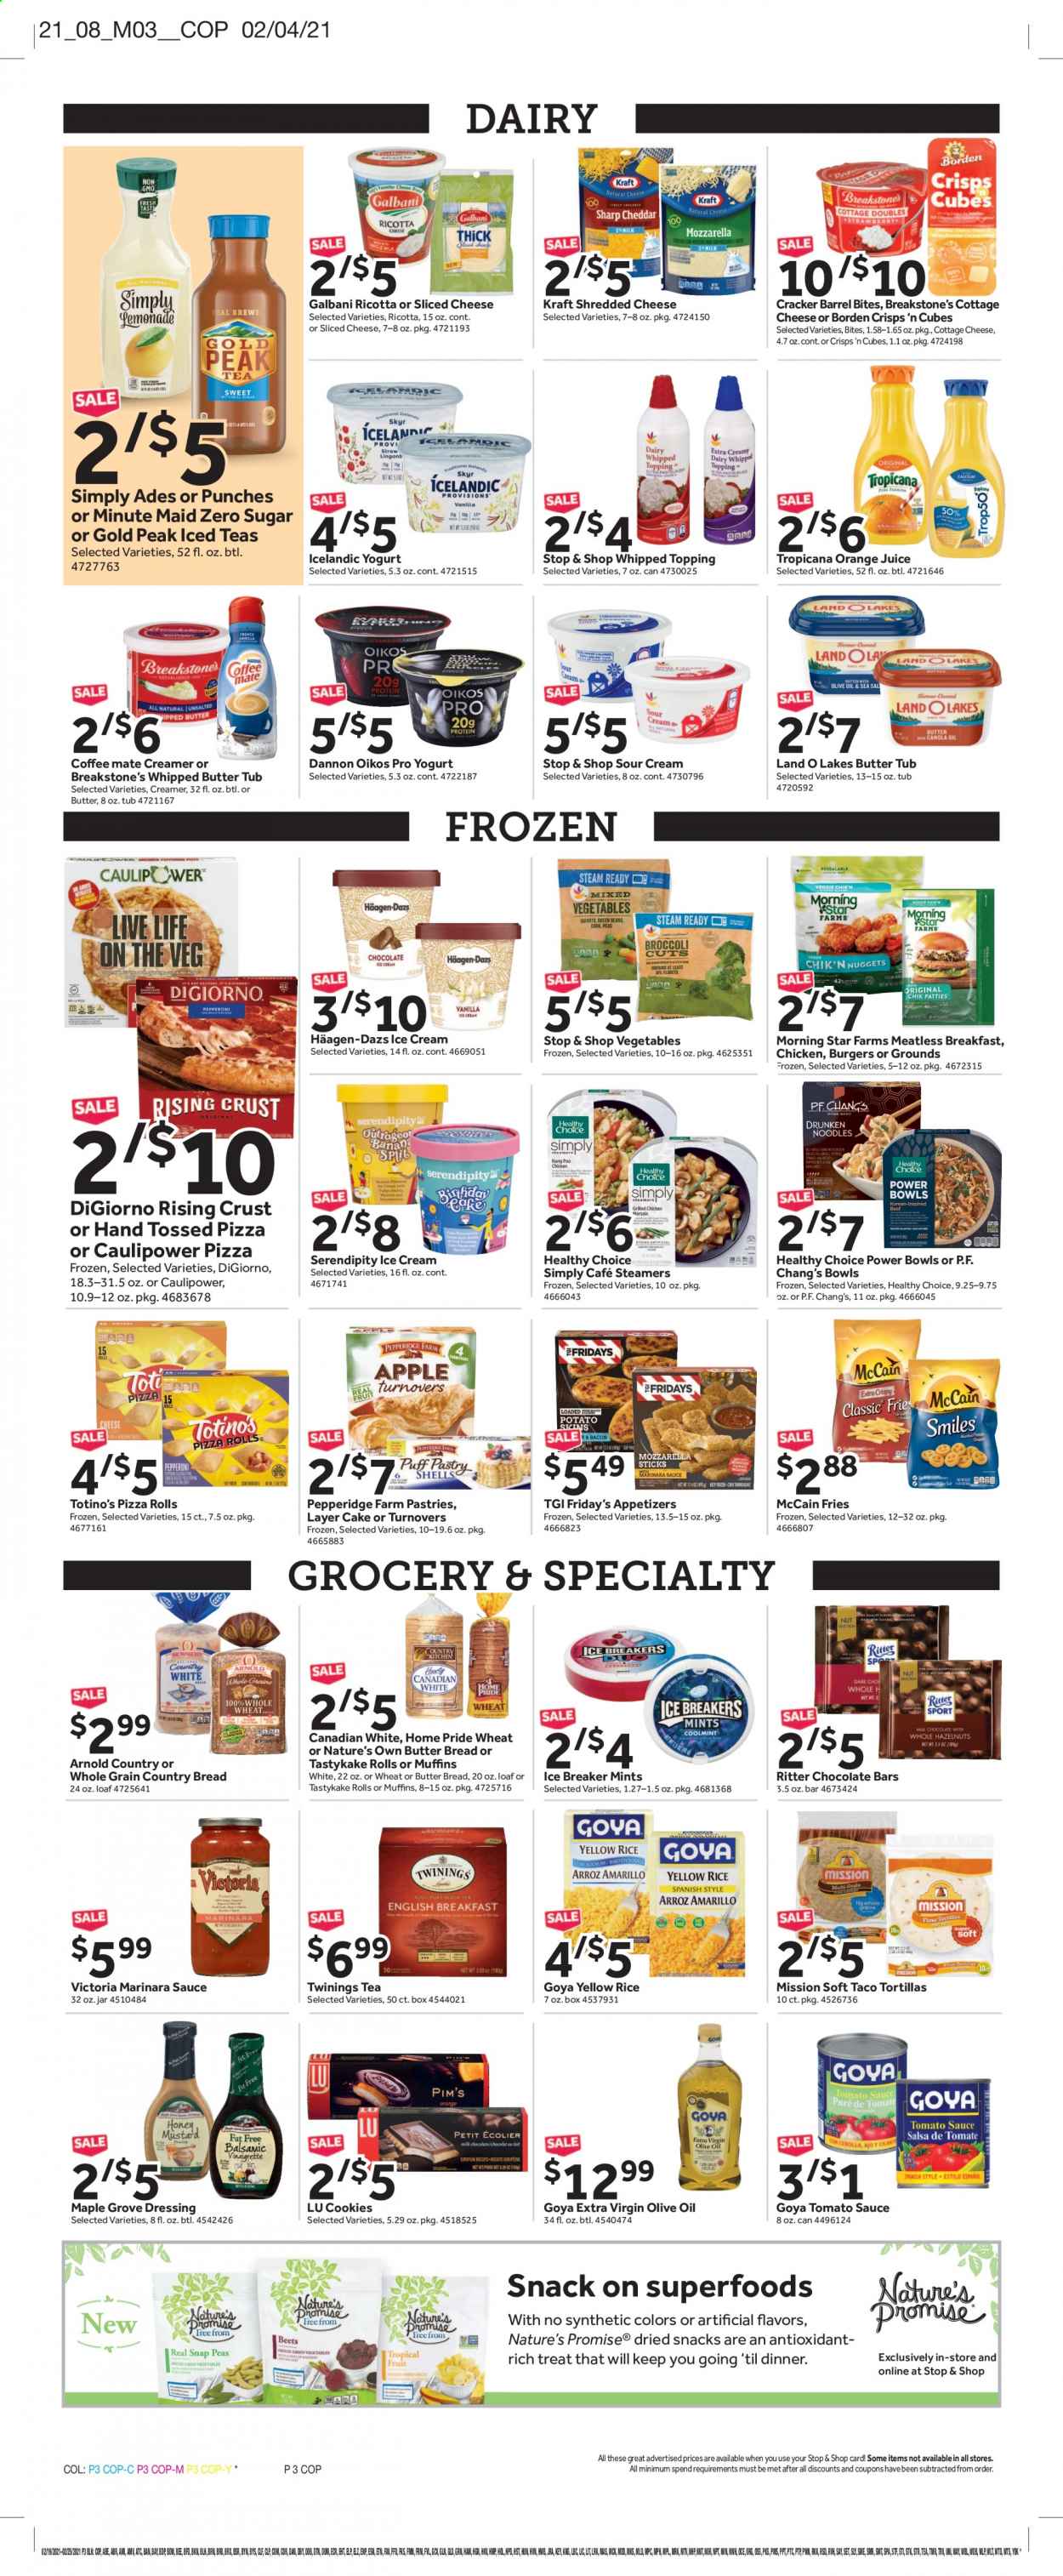 thumbnail - Stop & Shop Flyer - 02/19/2021 - 02/25/2021 - Sales products - bread, tortillas, wheat bread, pizza rolls, Nature’s Promise, tacos, turnovers, pastries, broccoli, snap peas, peas, mixed vegetables, snack, beetroot, chicken, hamburger, nuggets, sauce, noodles, Healthy Choice, Kraft®, ready meal, plant based ready meal, cottage cheese, ricotta, shredded cheese, sliced cheese, cheddar, Galbani, Oikos, Dannon, Coffee-Mate, lard, whipped butter, sour cream, creamer, coffee and tea creamer, puff pastry, ice cream, Häagen-Dazs, Ola, frozen vegetables, McCain, potato fries, chocolate bar, salty snack, crisps, topping, tomato sauce, Goya, rice, mustard, honey mustard, dressing, salsa, extra virgin olive oil, olive oil, oil, jam, hazelnuts, lemonade, orange juice, fruit drink, ice tea, Gold Peak Tea, Twinings, straw, aa batteries, Nature's Own. Page 5.